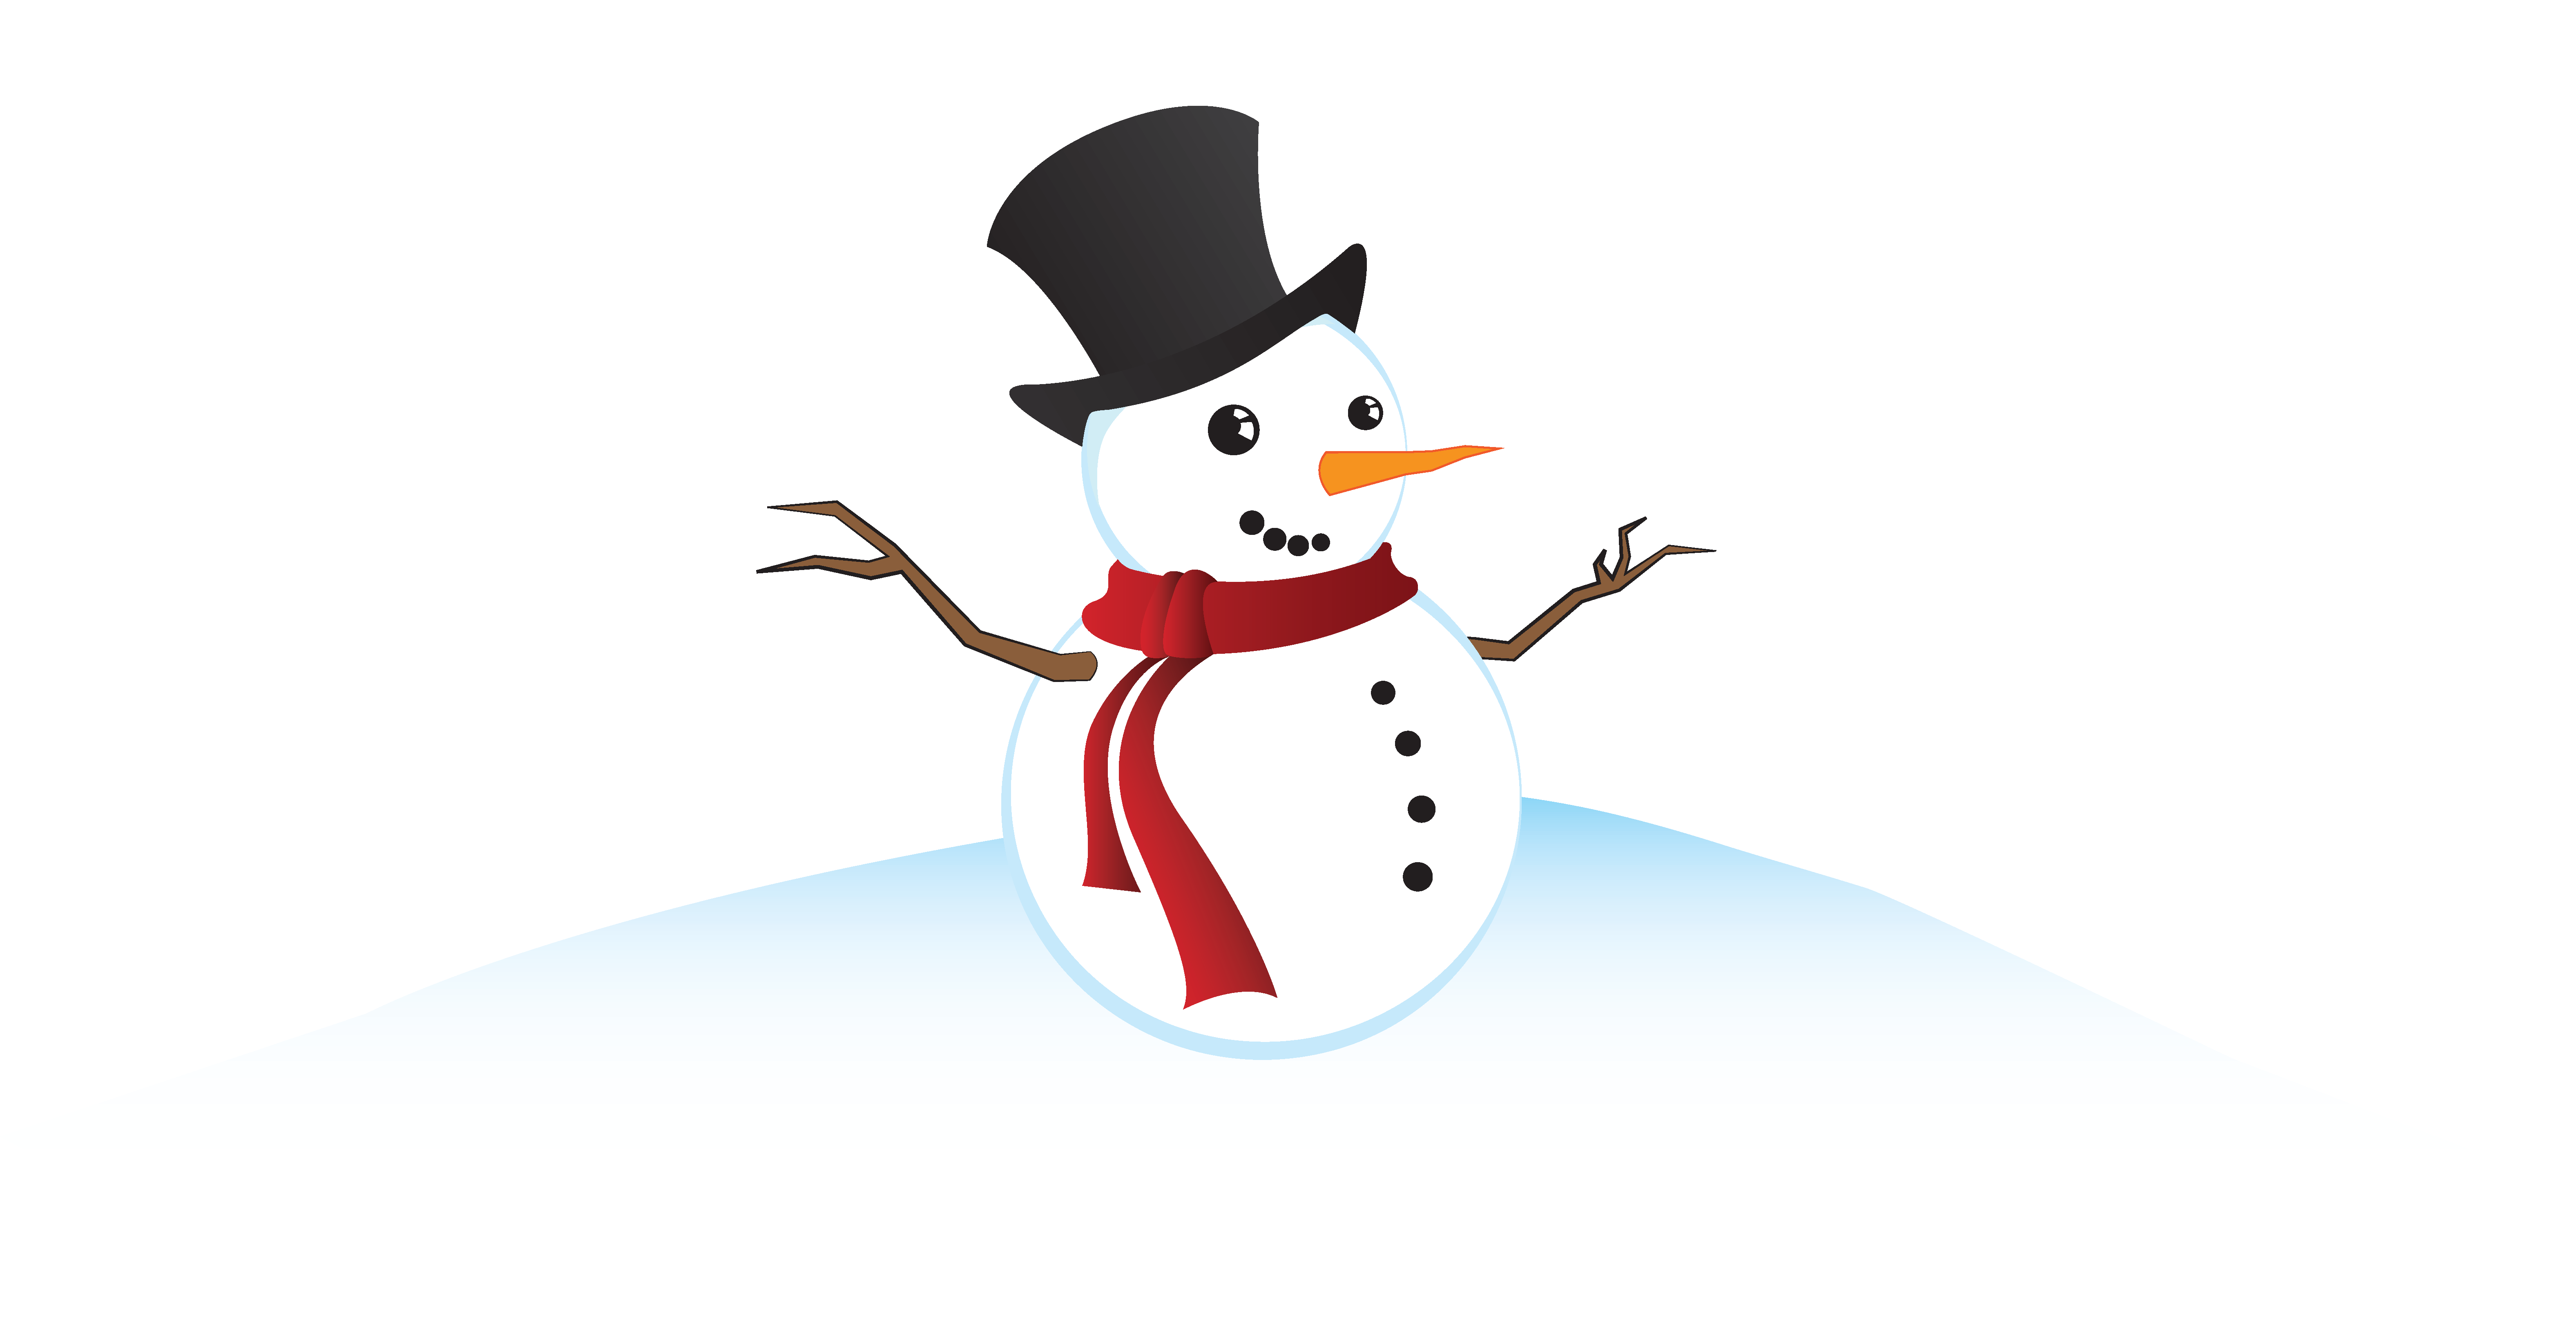 Crowd clipart youngster. The great snowman building